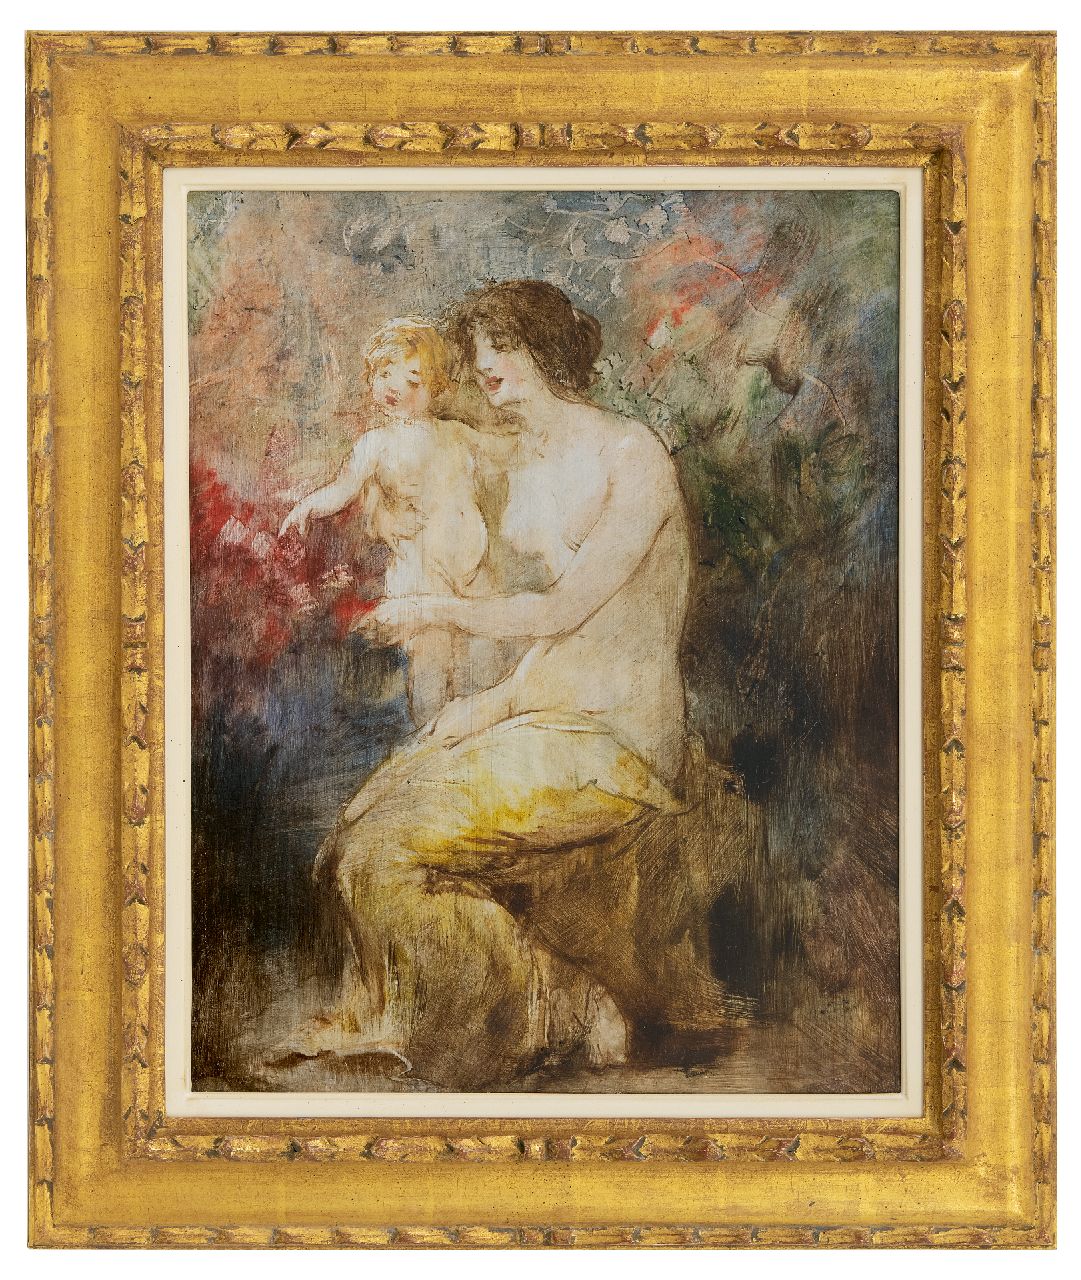 Smith H.  | Hobbe Smith | Paintings offered for sale | Mother and child, oil on panel 46.3 x 36.6 cm